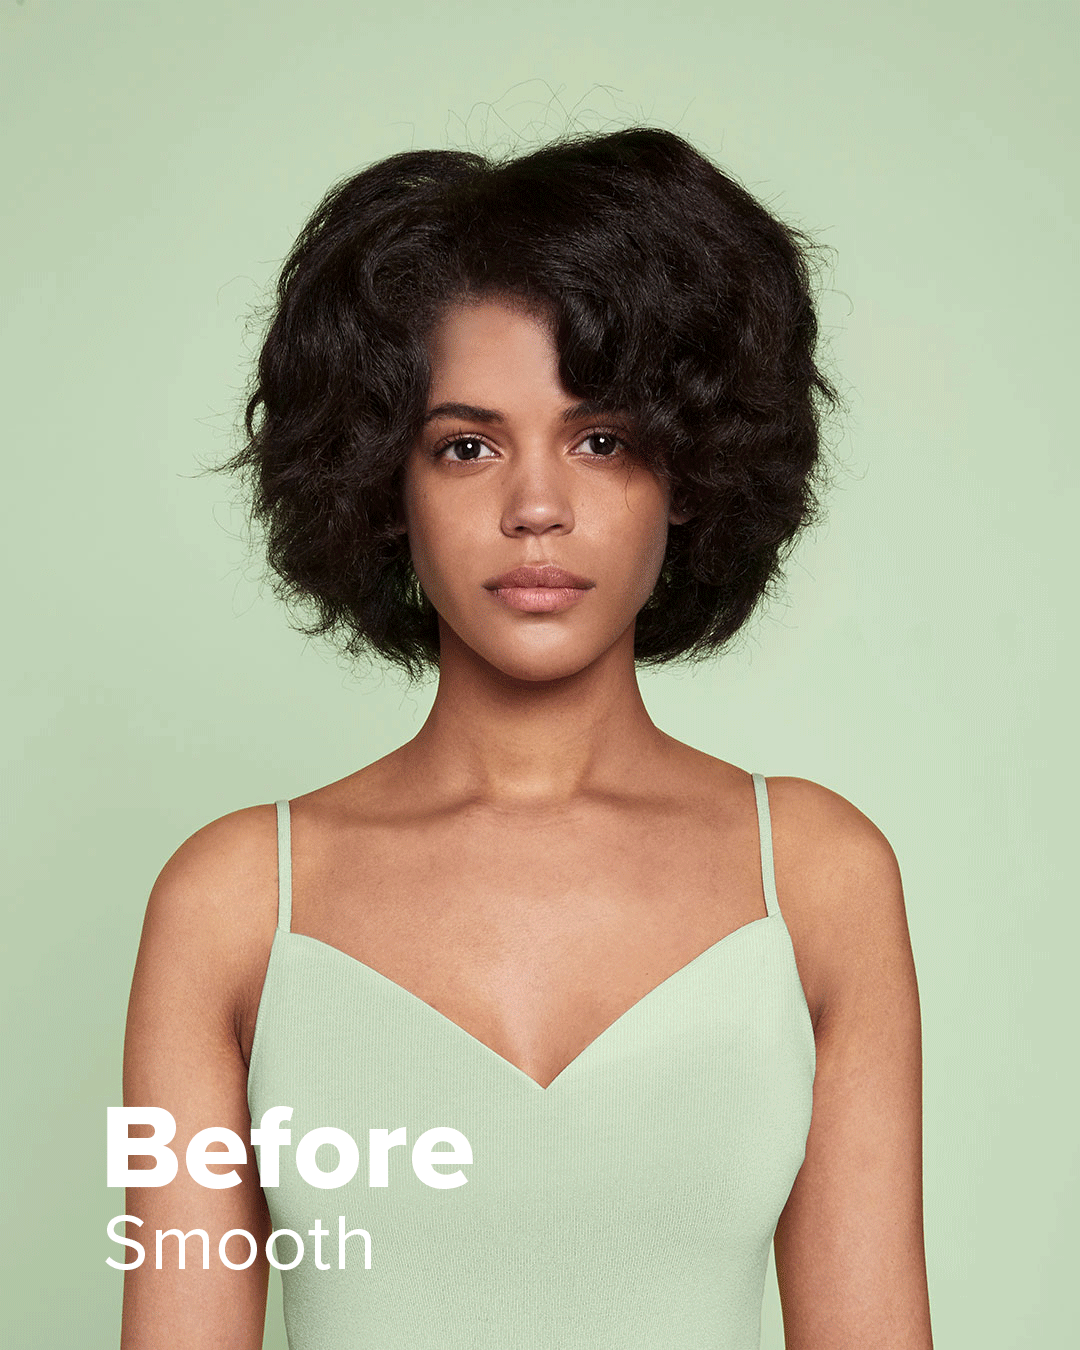 PM_Clean_Beauty_Smooth_Before_After.gif